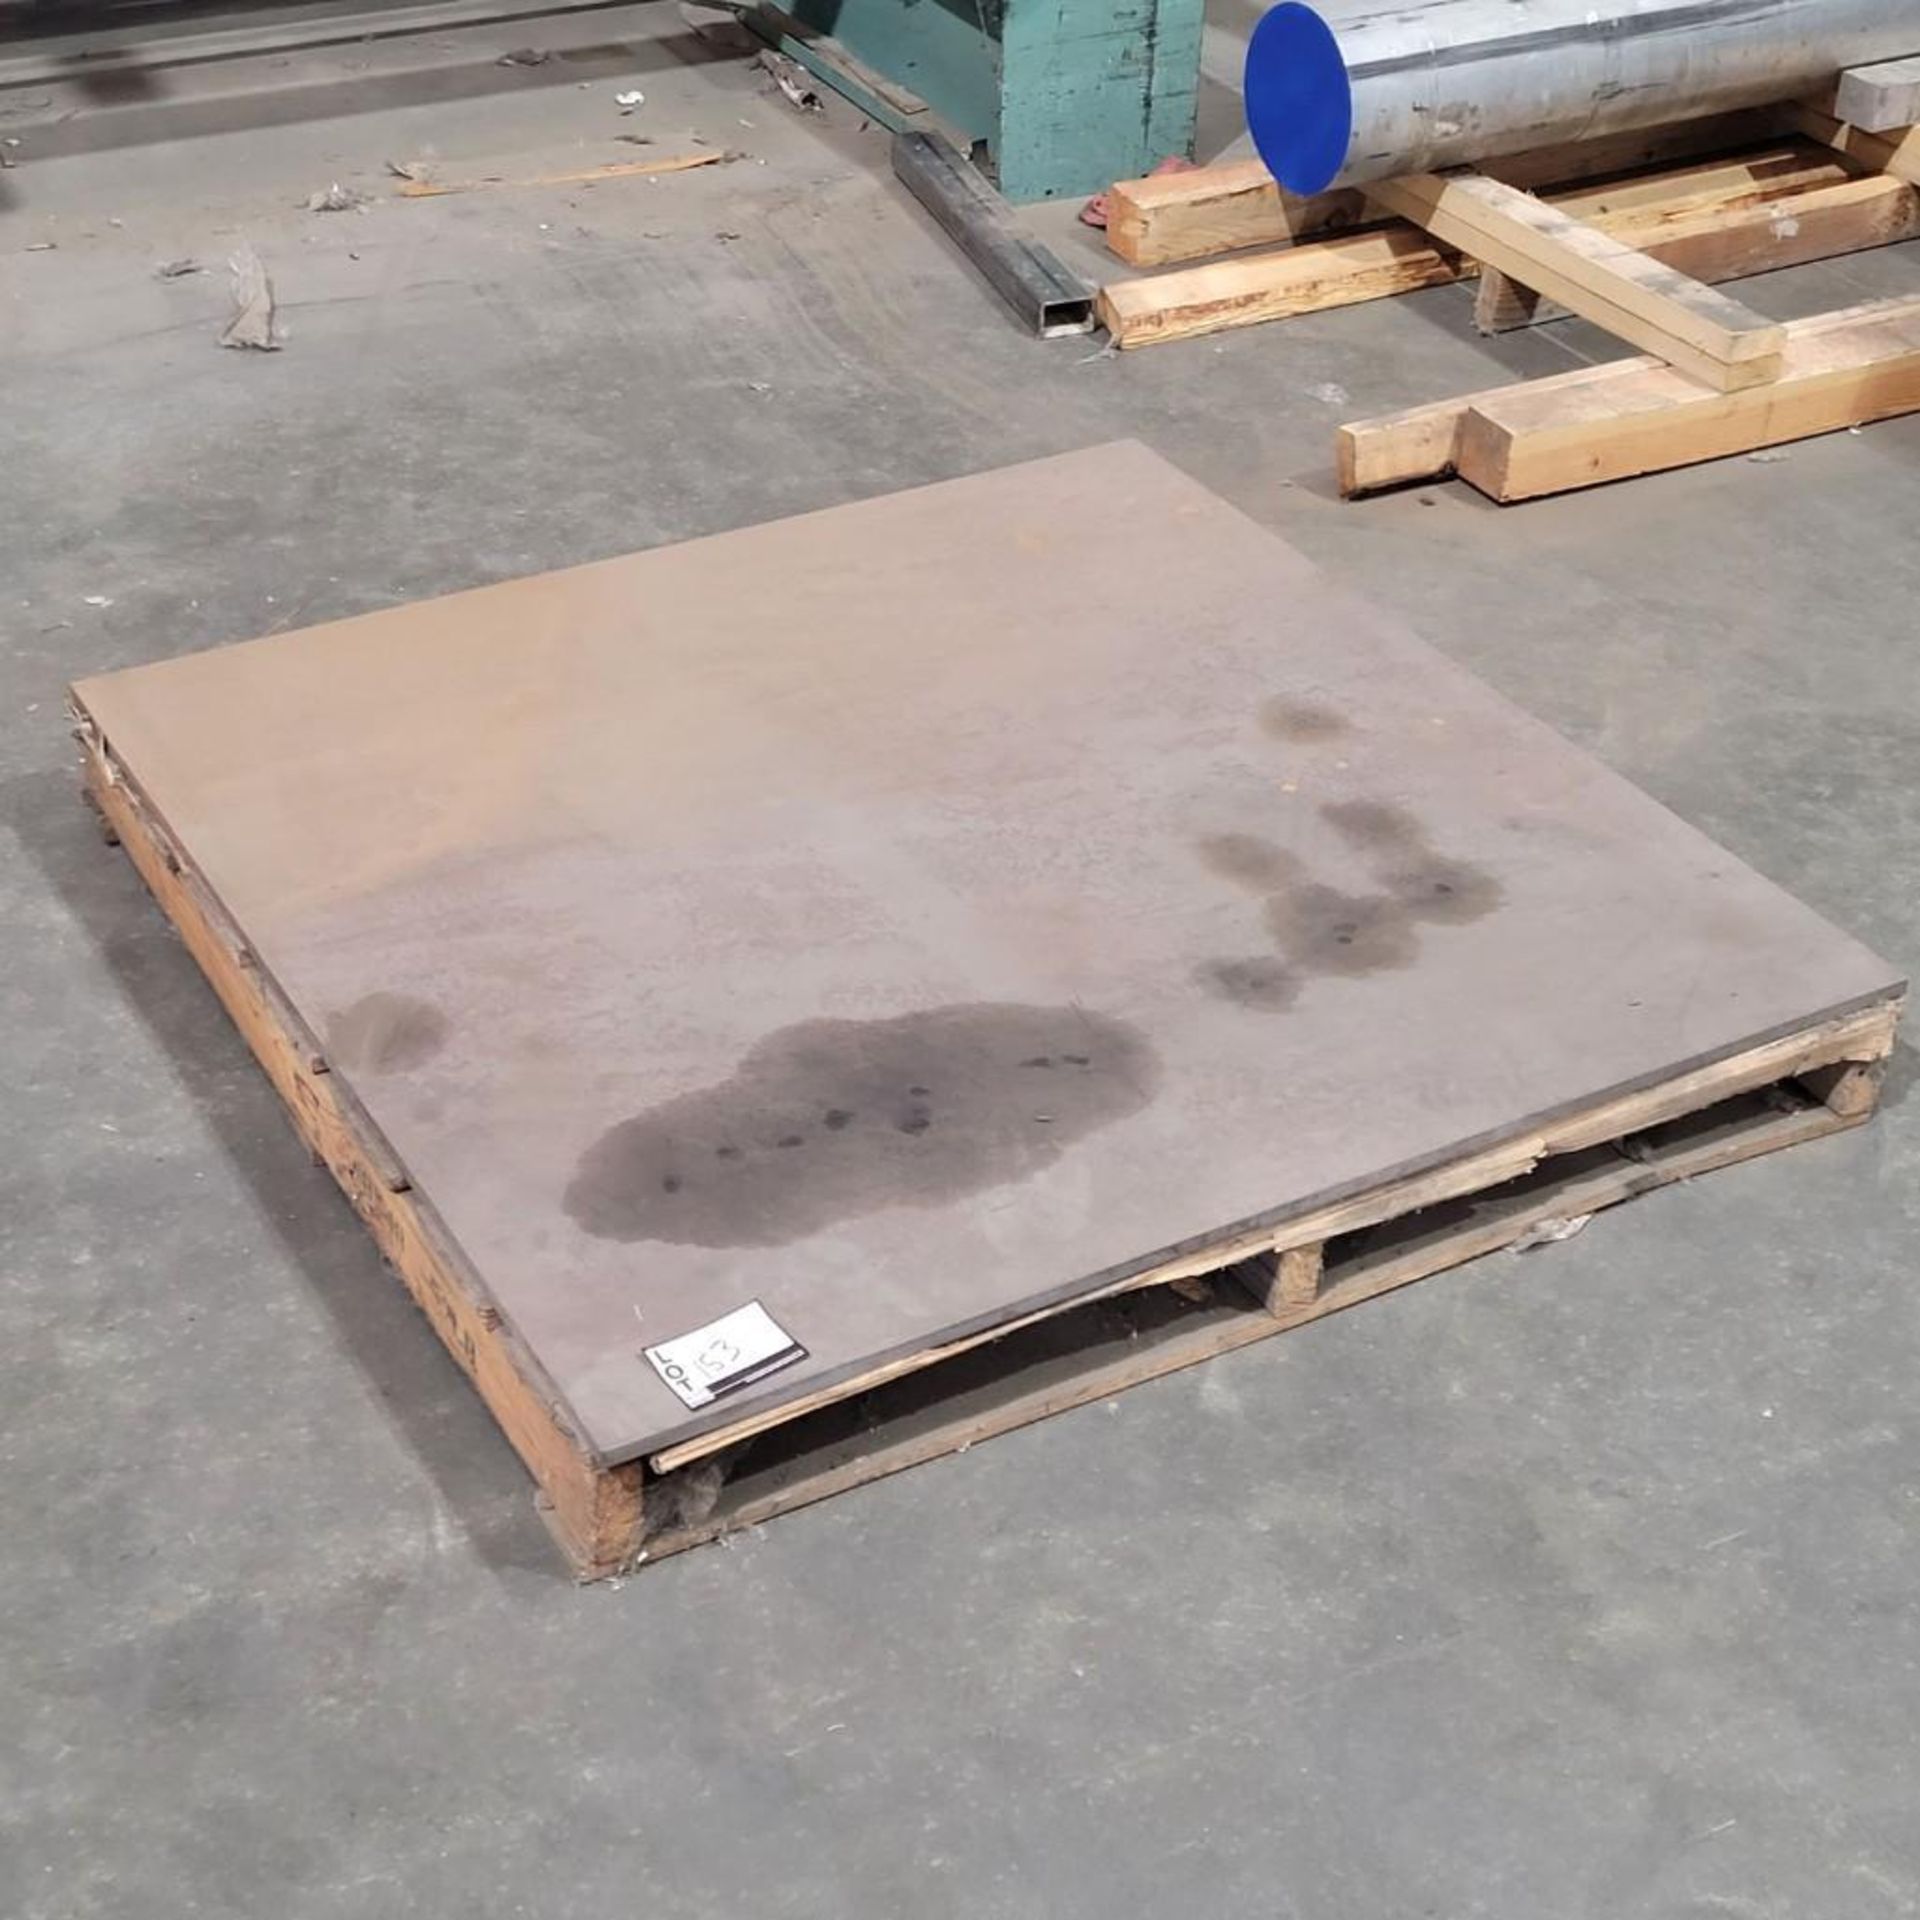 T1 High Strength Steel Plate 48” x 48” x 5/8” Thick